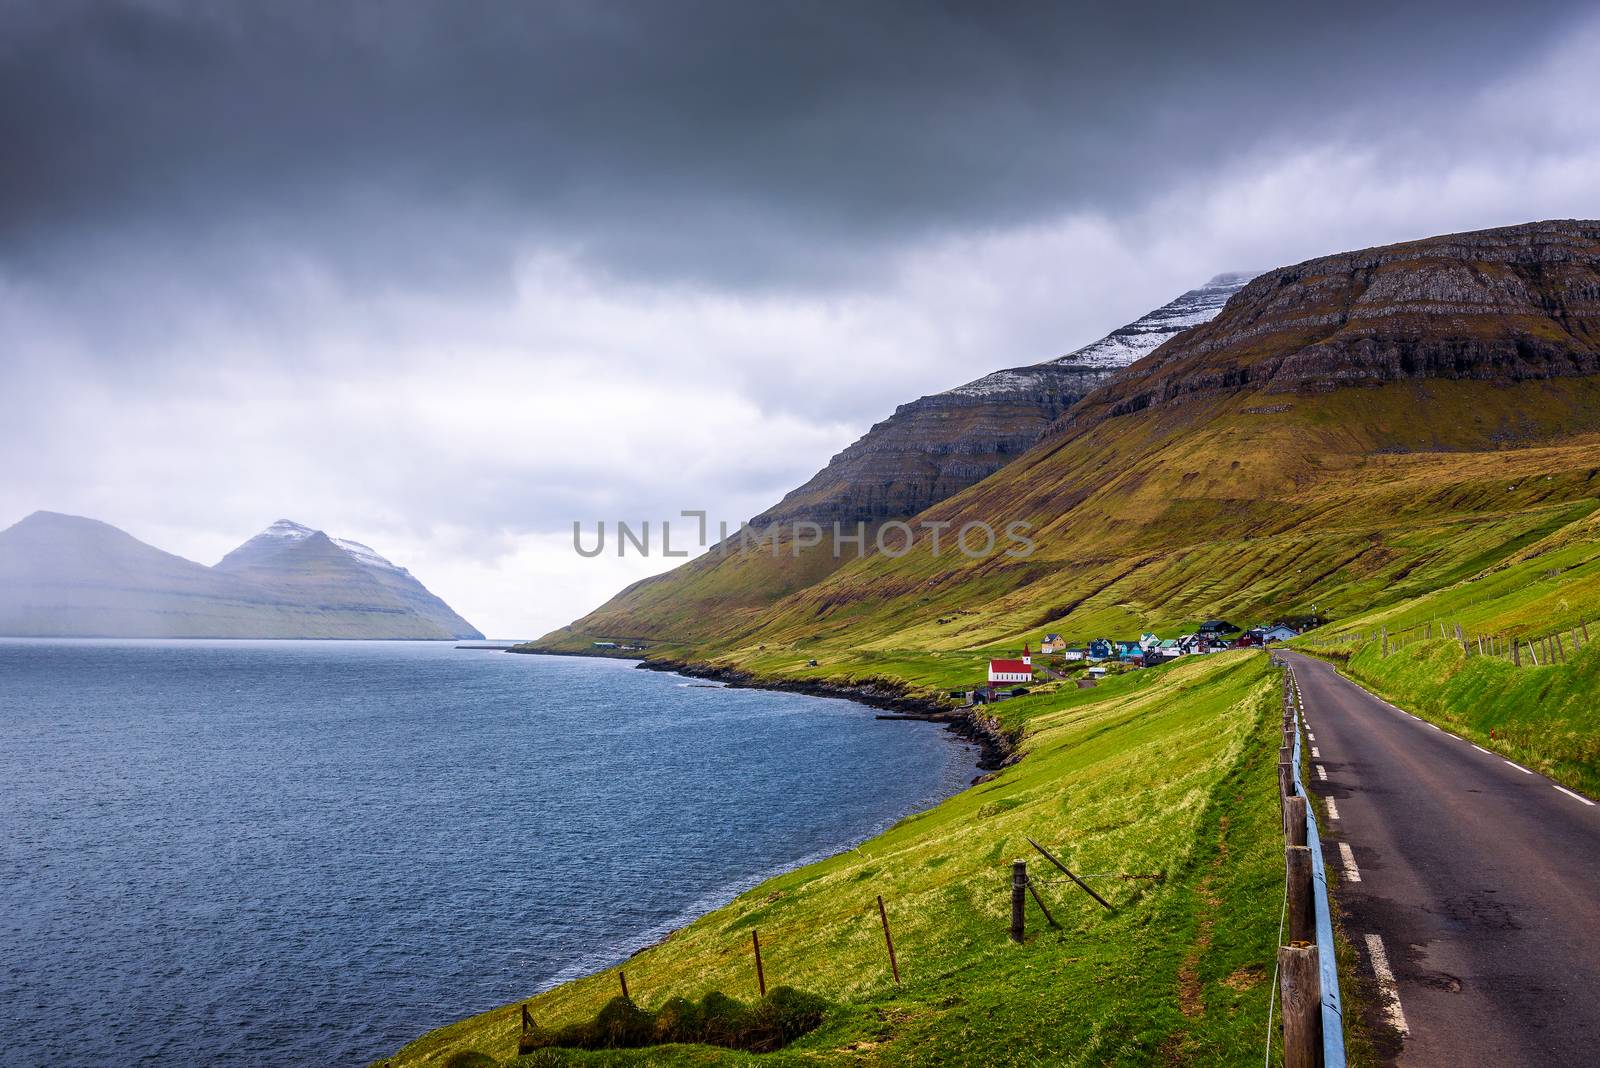 Village of Husar located on the island of Kalsoy in Faroe Islands by nickfox